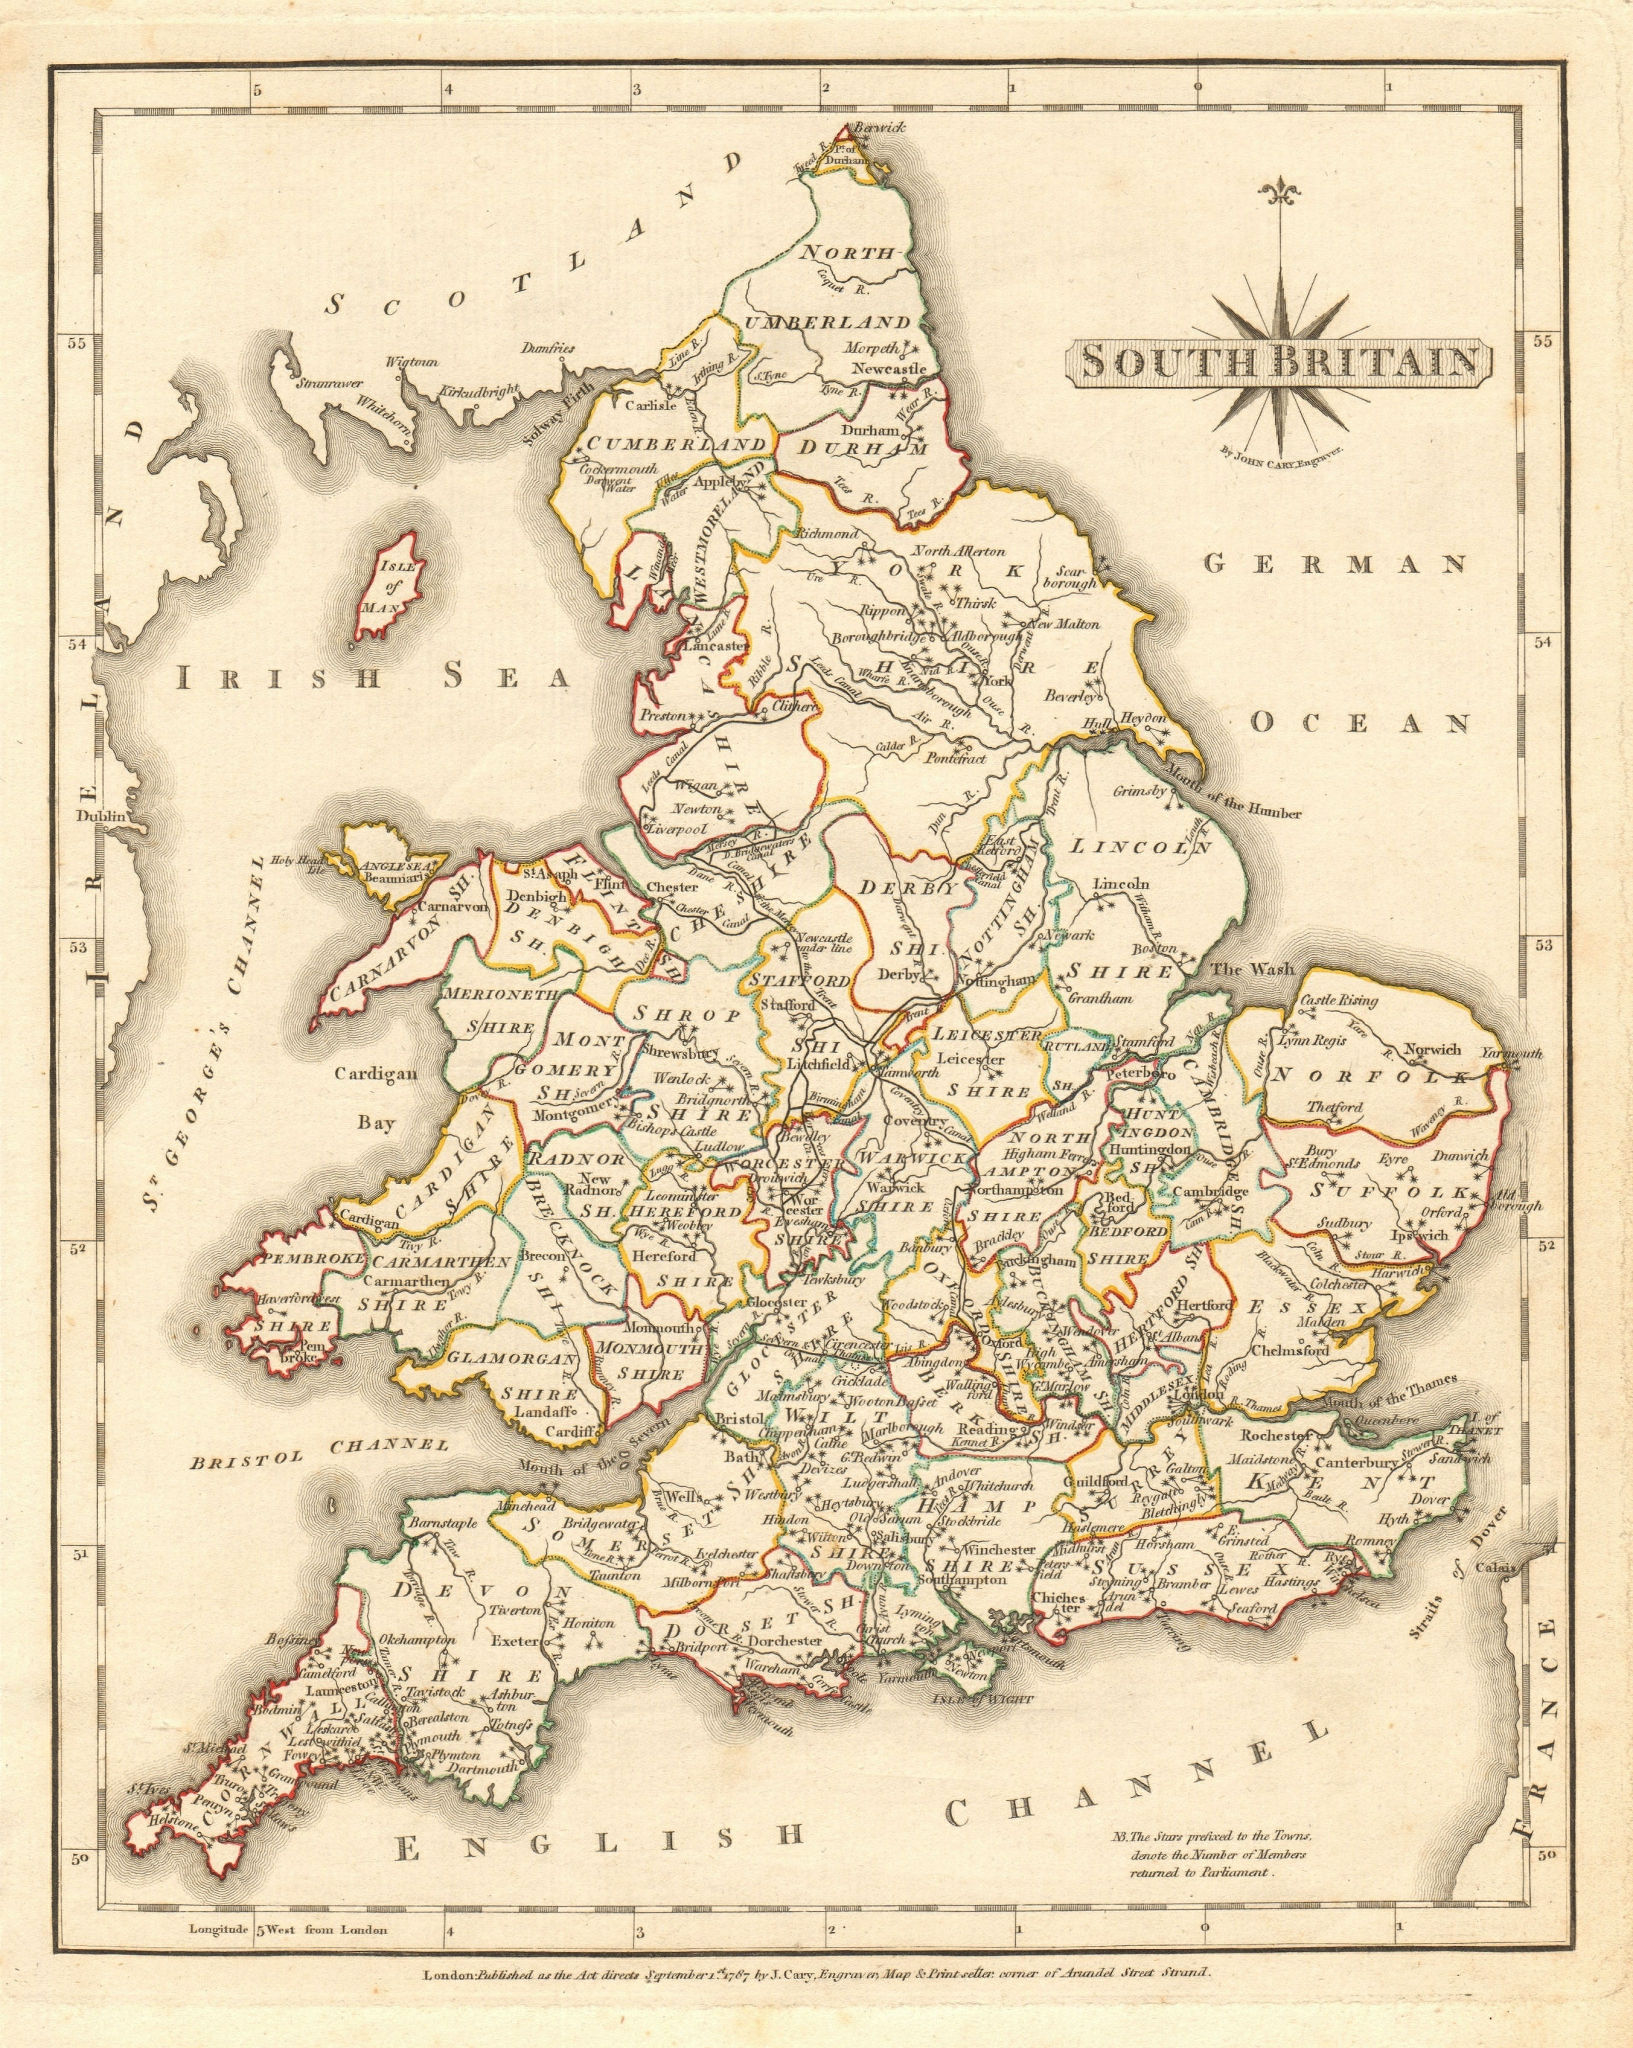 Antique map of SOUTH BRITAIN by JOHN CARY. Original outline colour 1787